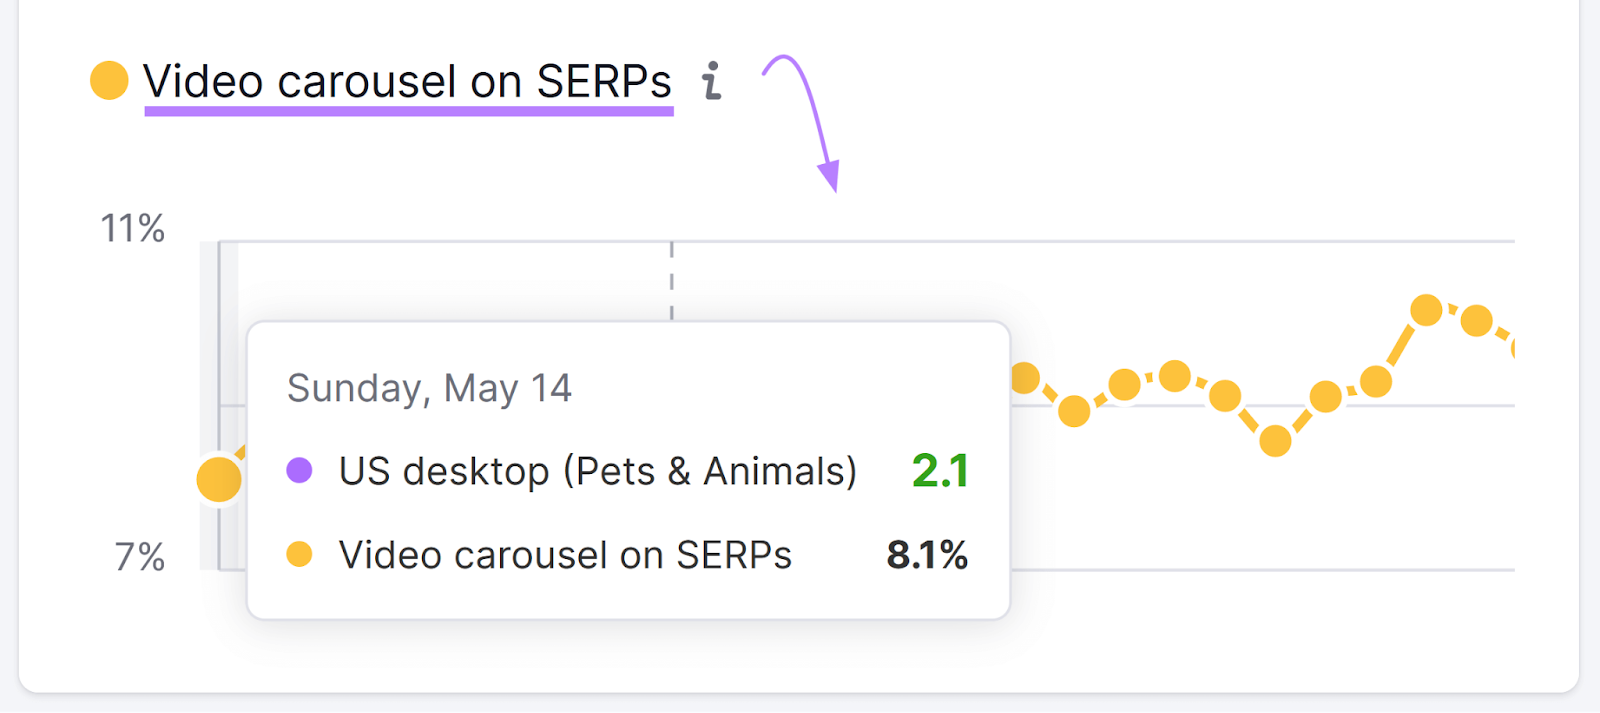 "Video carousel on SERPs" graph